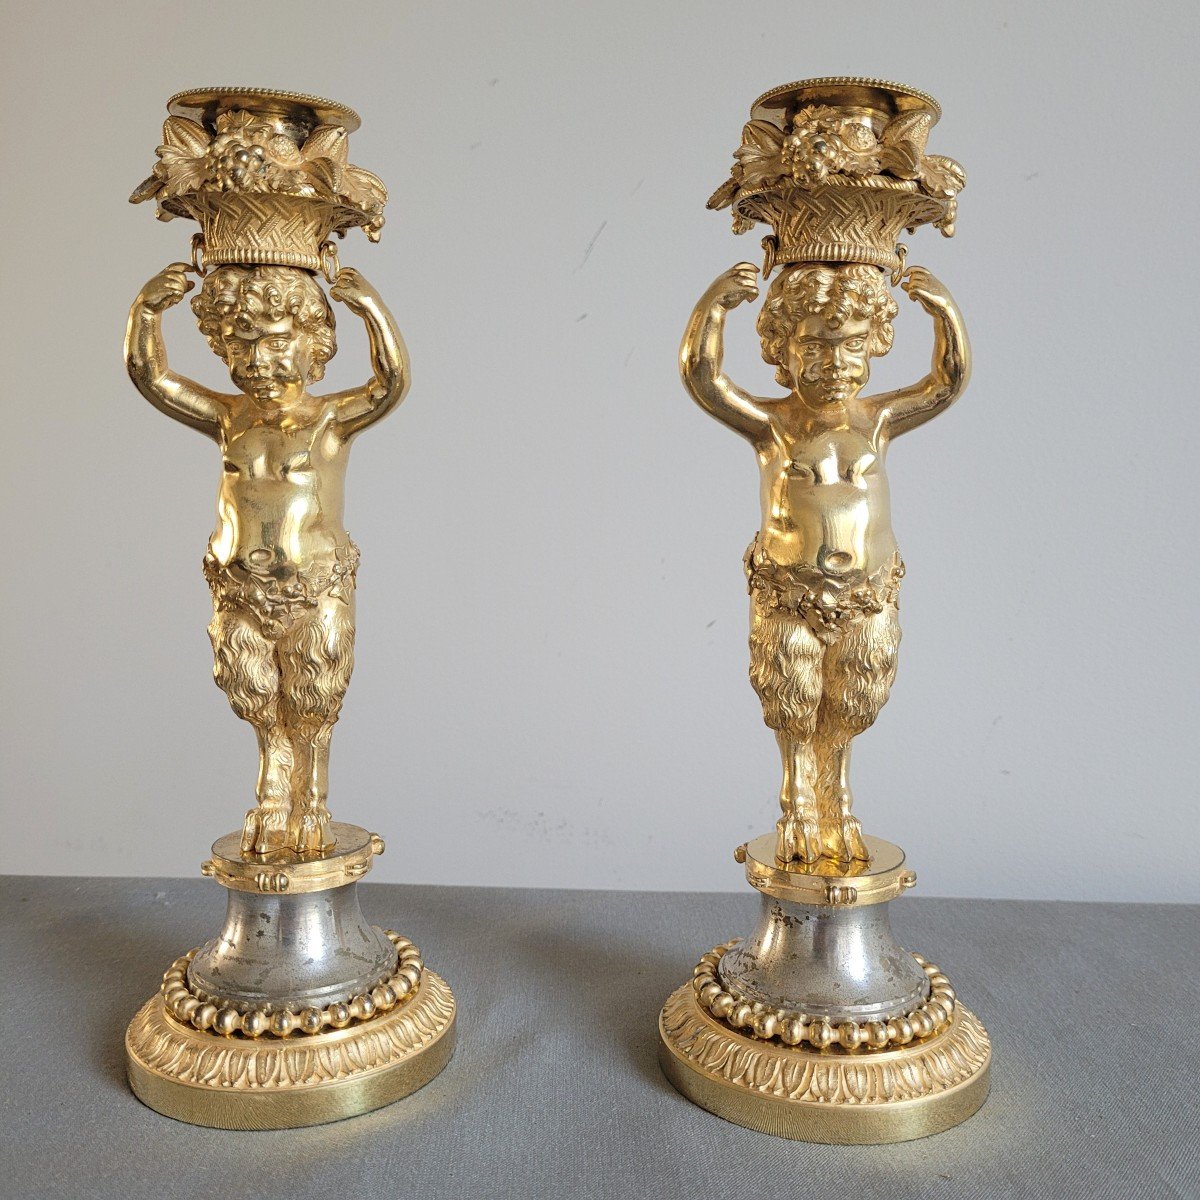 Pair Of Faun Torches. Early 19th Century.